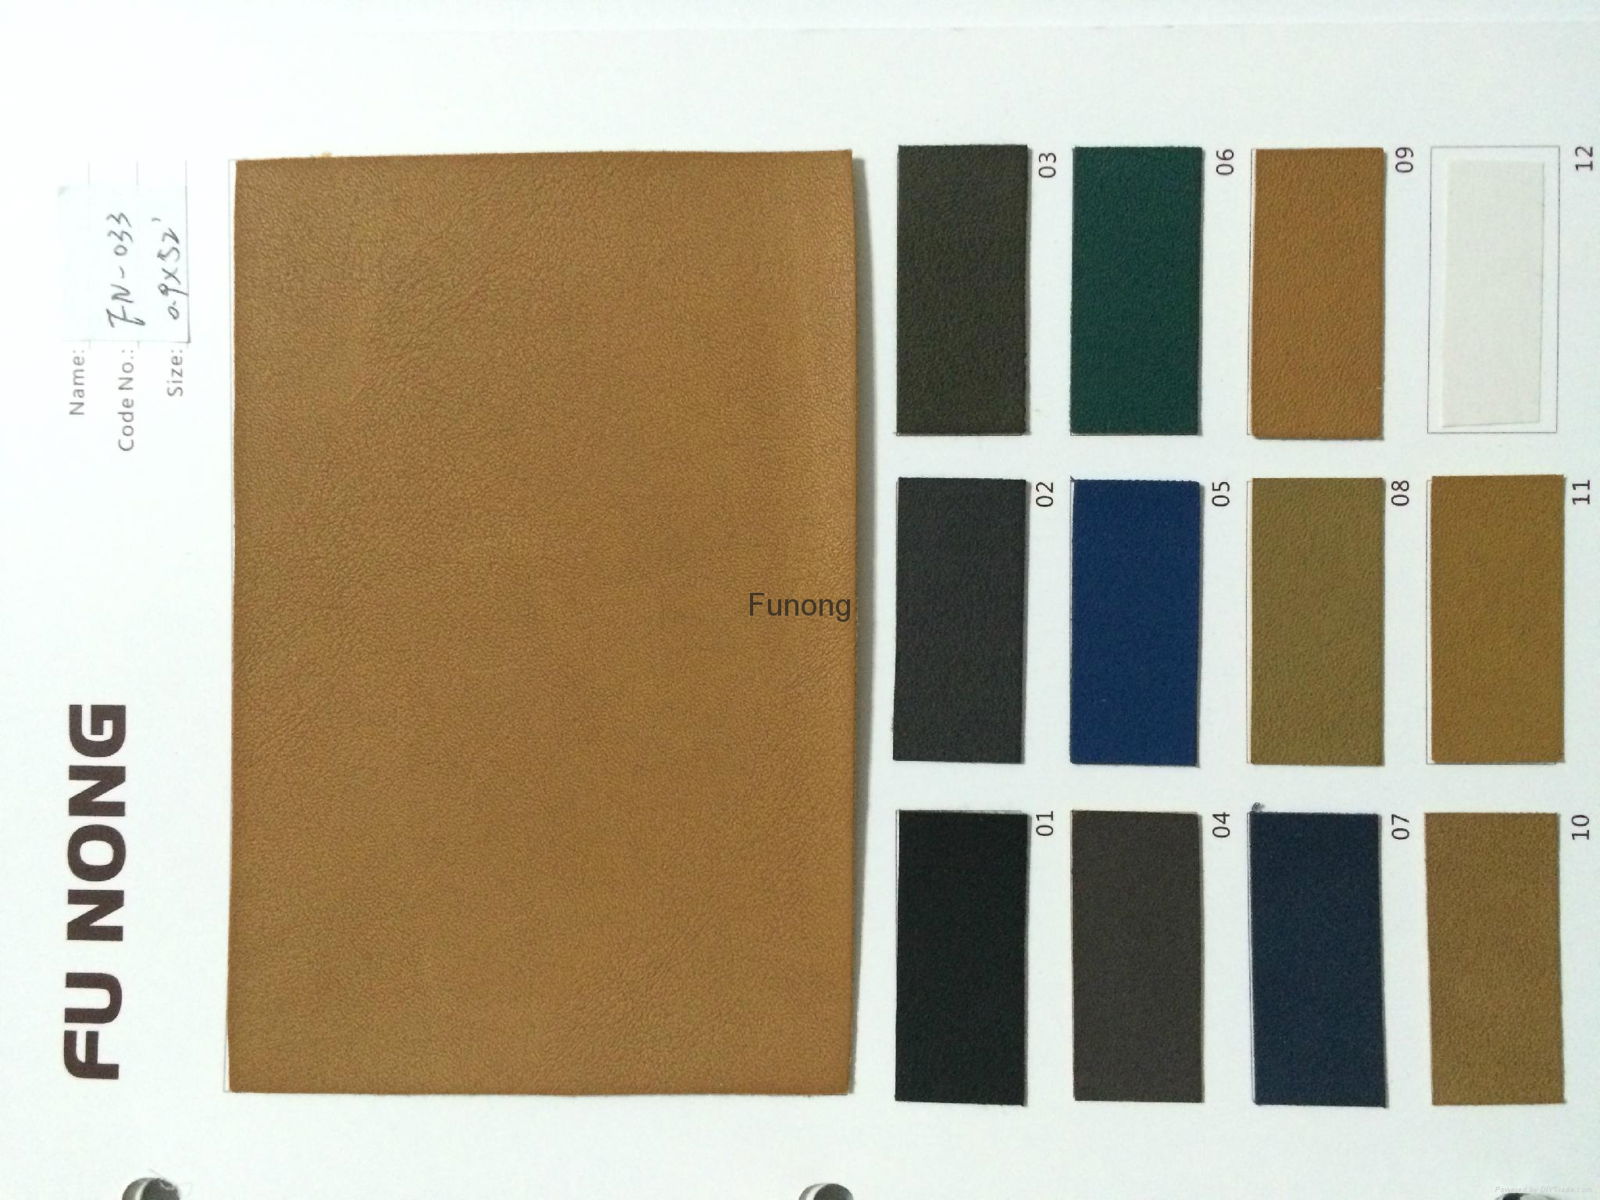 PU leather for bags & shoes